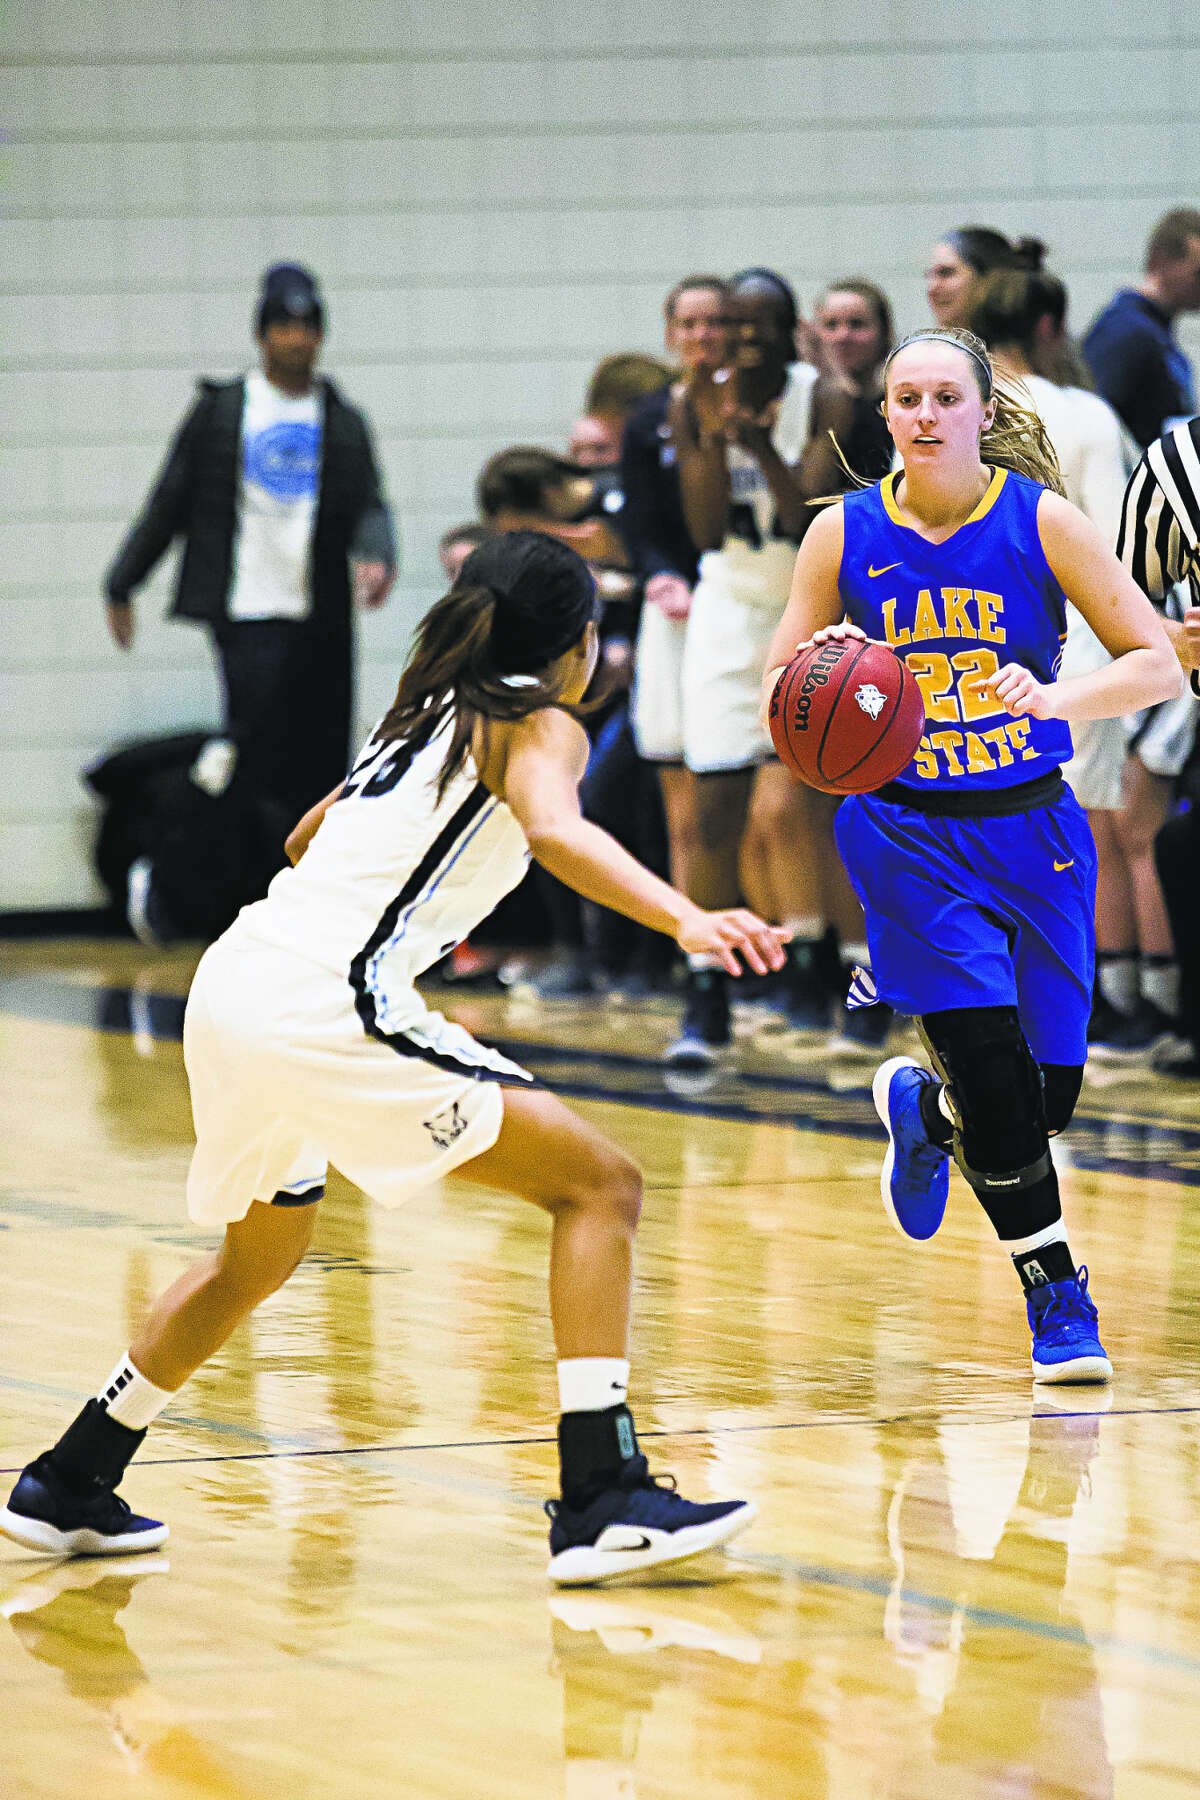 Lake Superior State's Sadie DeWildt runs the offense during a Jan. 31, 2019 game against Northwood.